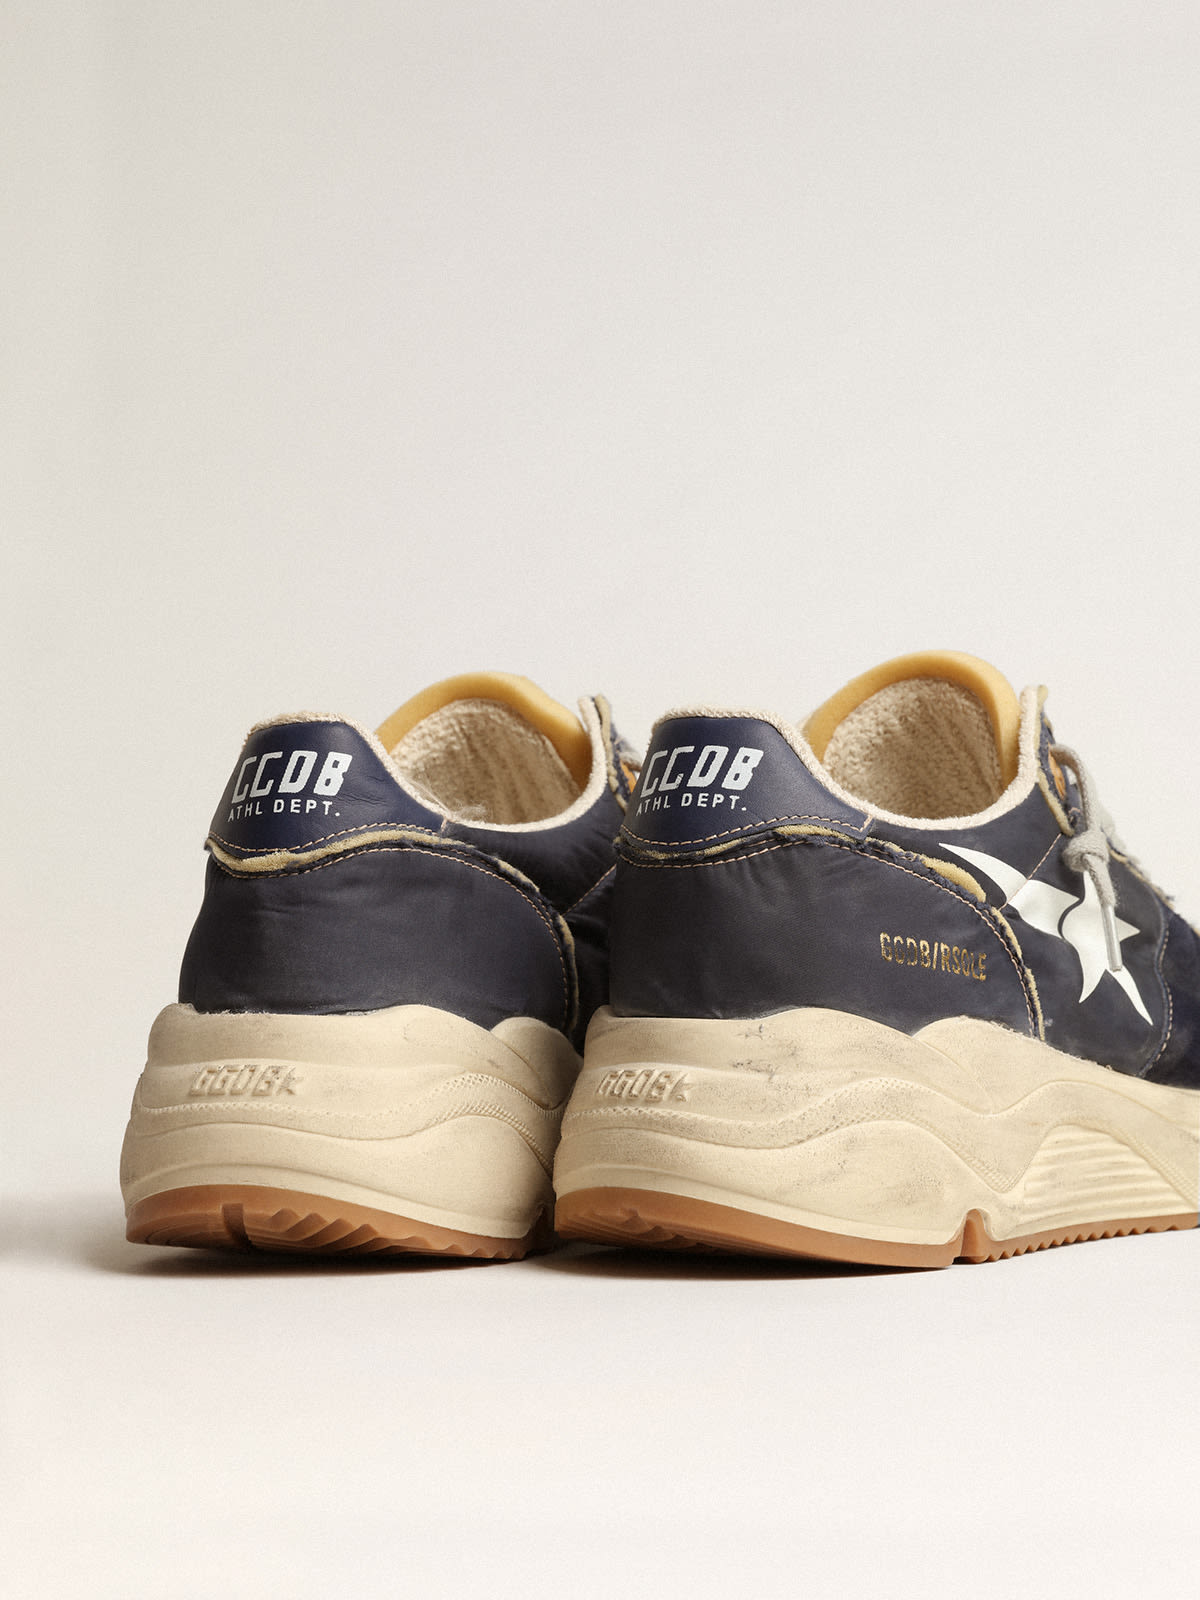 Golden Goose - Running Sole in blue nylon with white printed star in 